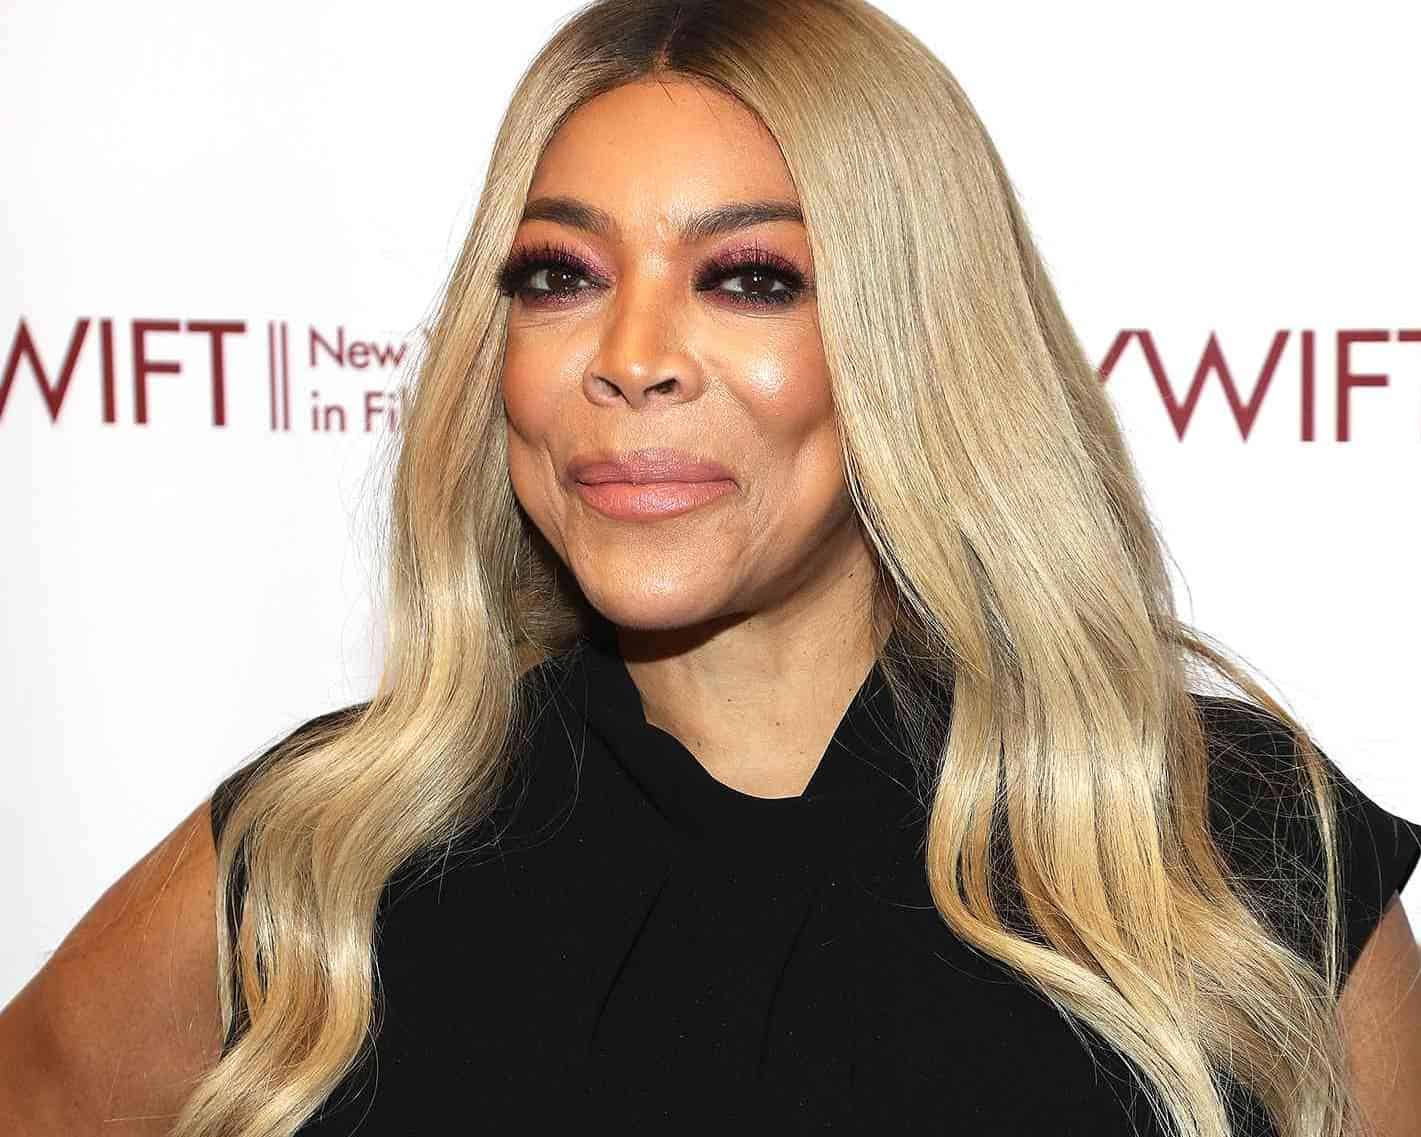 Wendy Williams' net worth is approximately $20 million